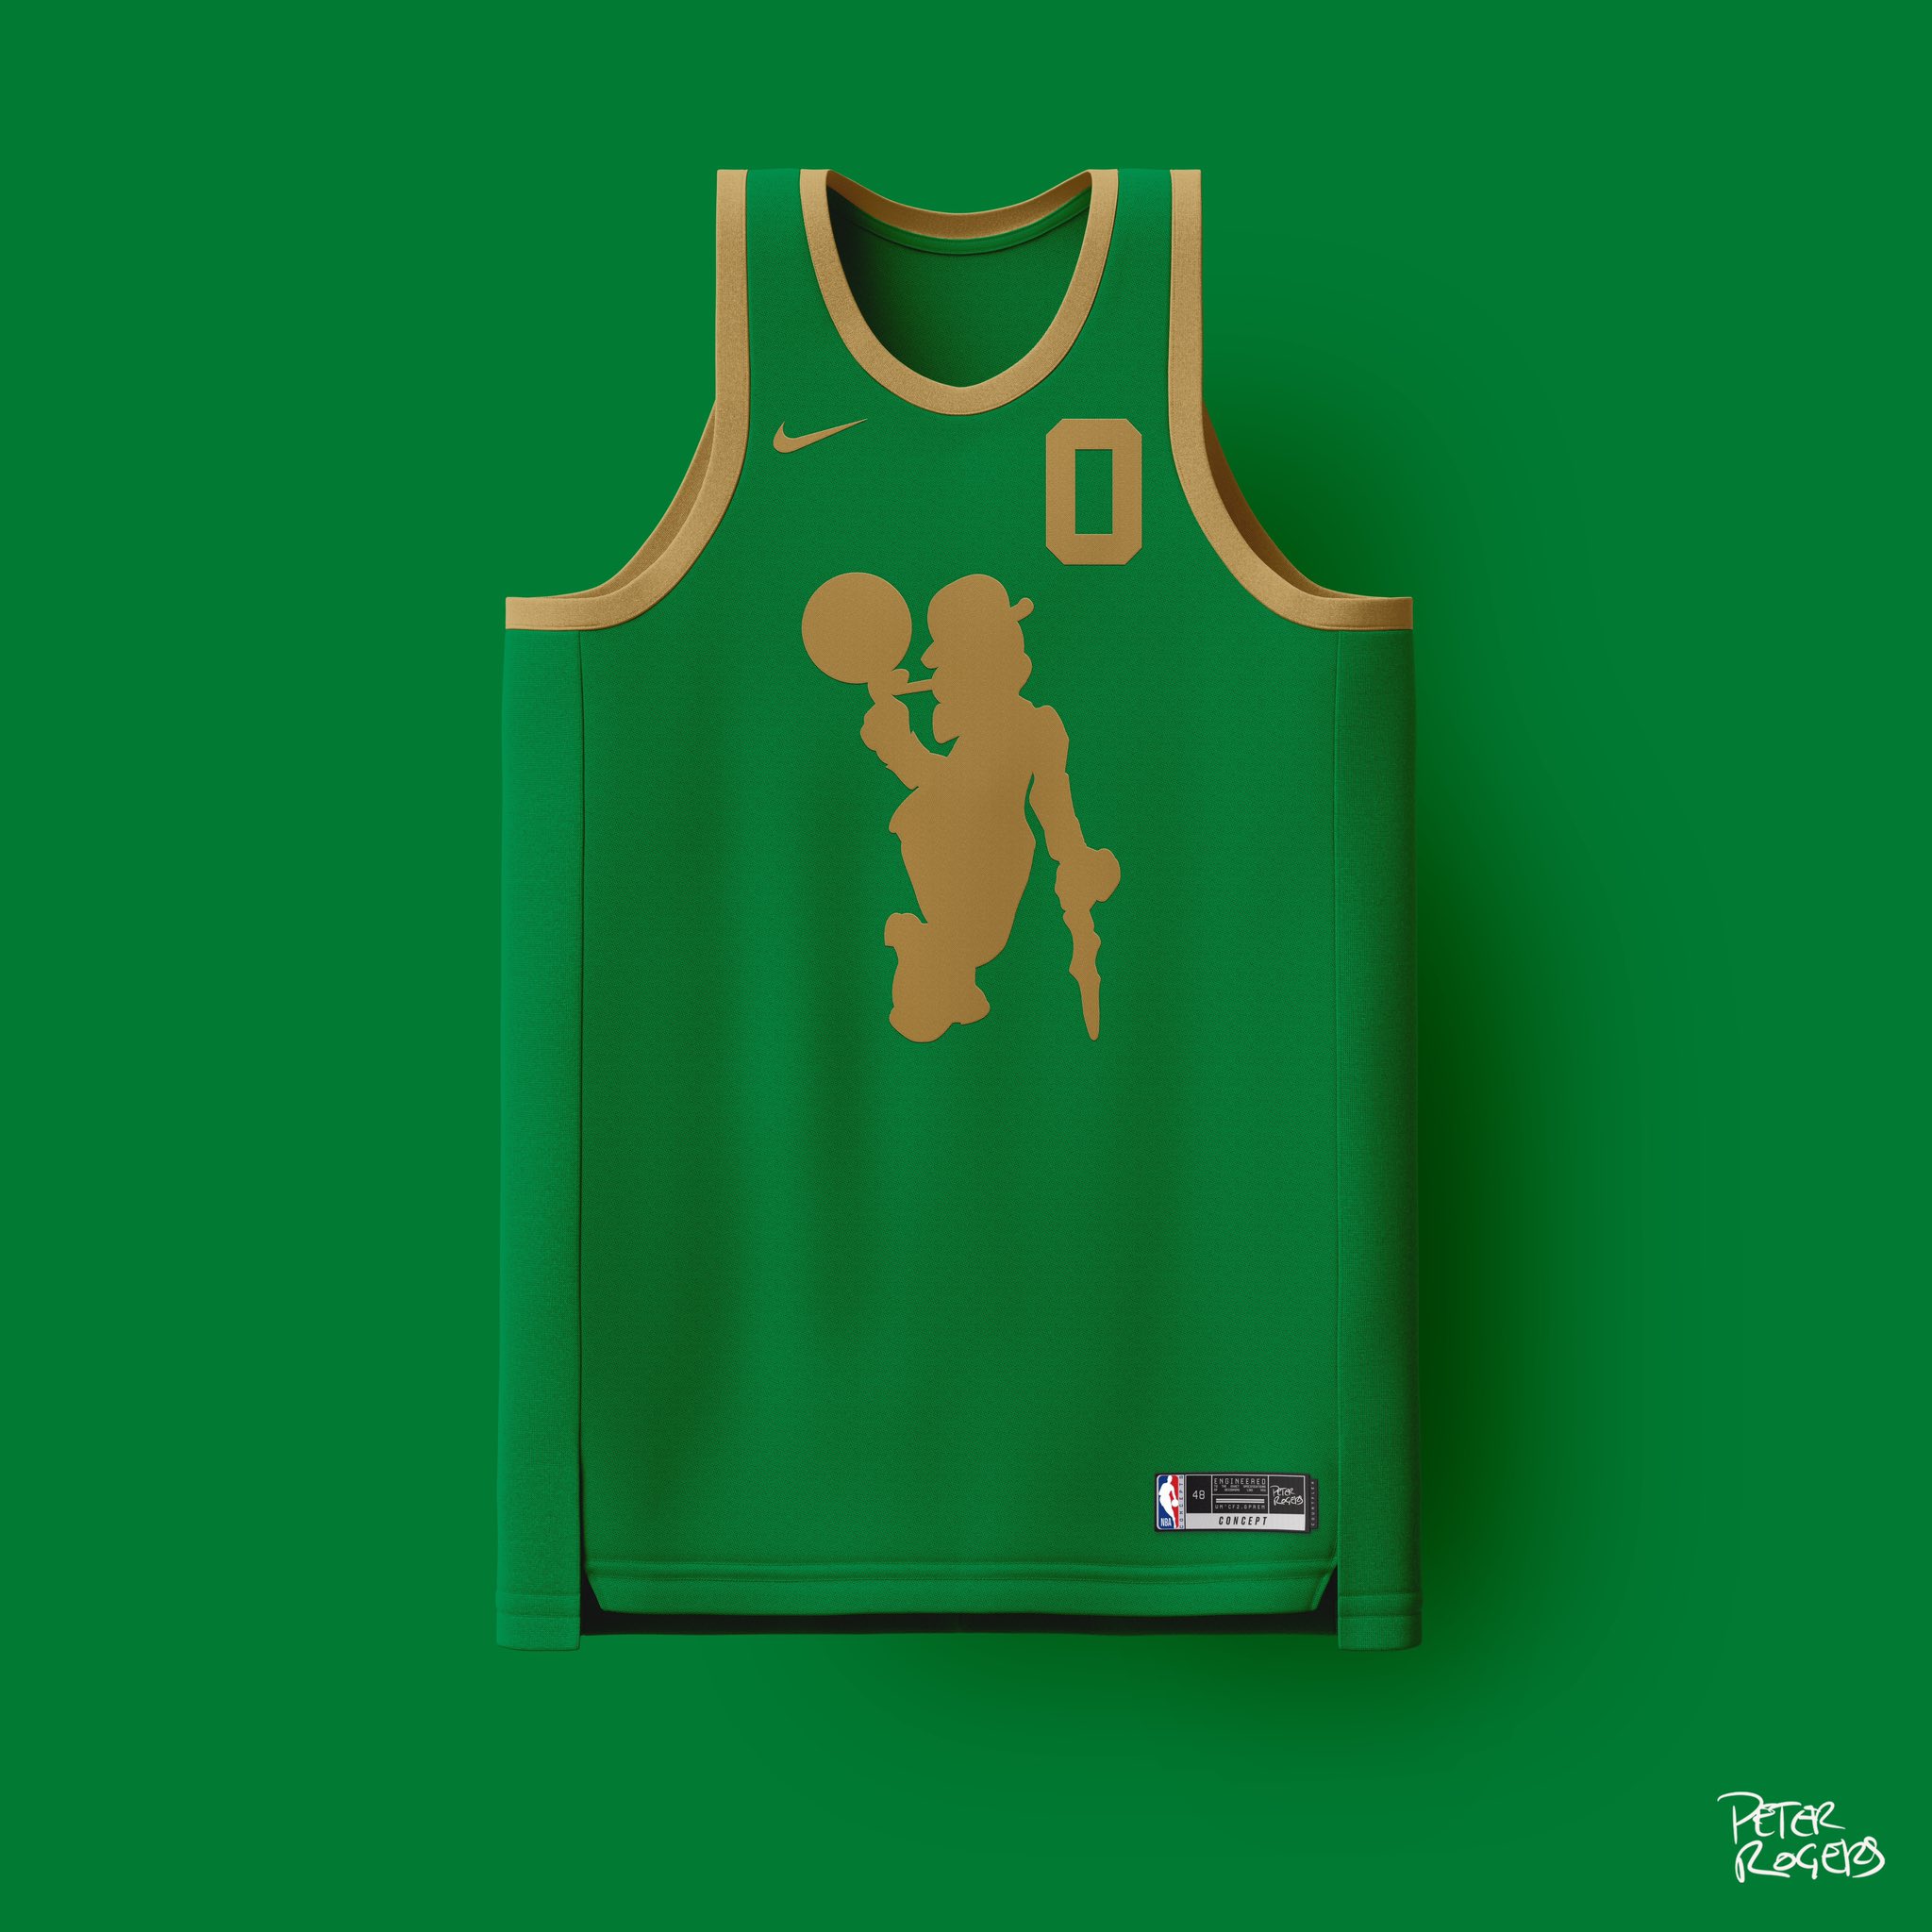 Meet Pete Rogers, the Celtics fan who designs a new jersey after every win  : r/bostonceltics